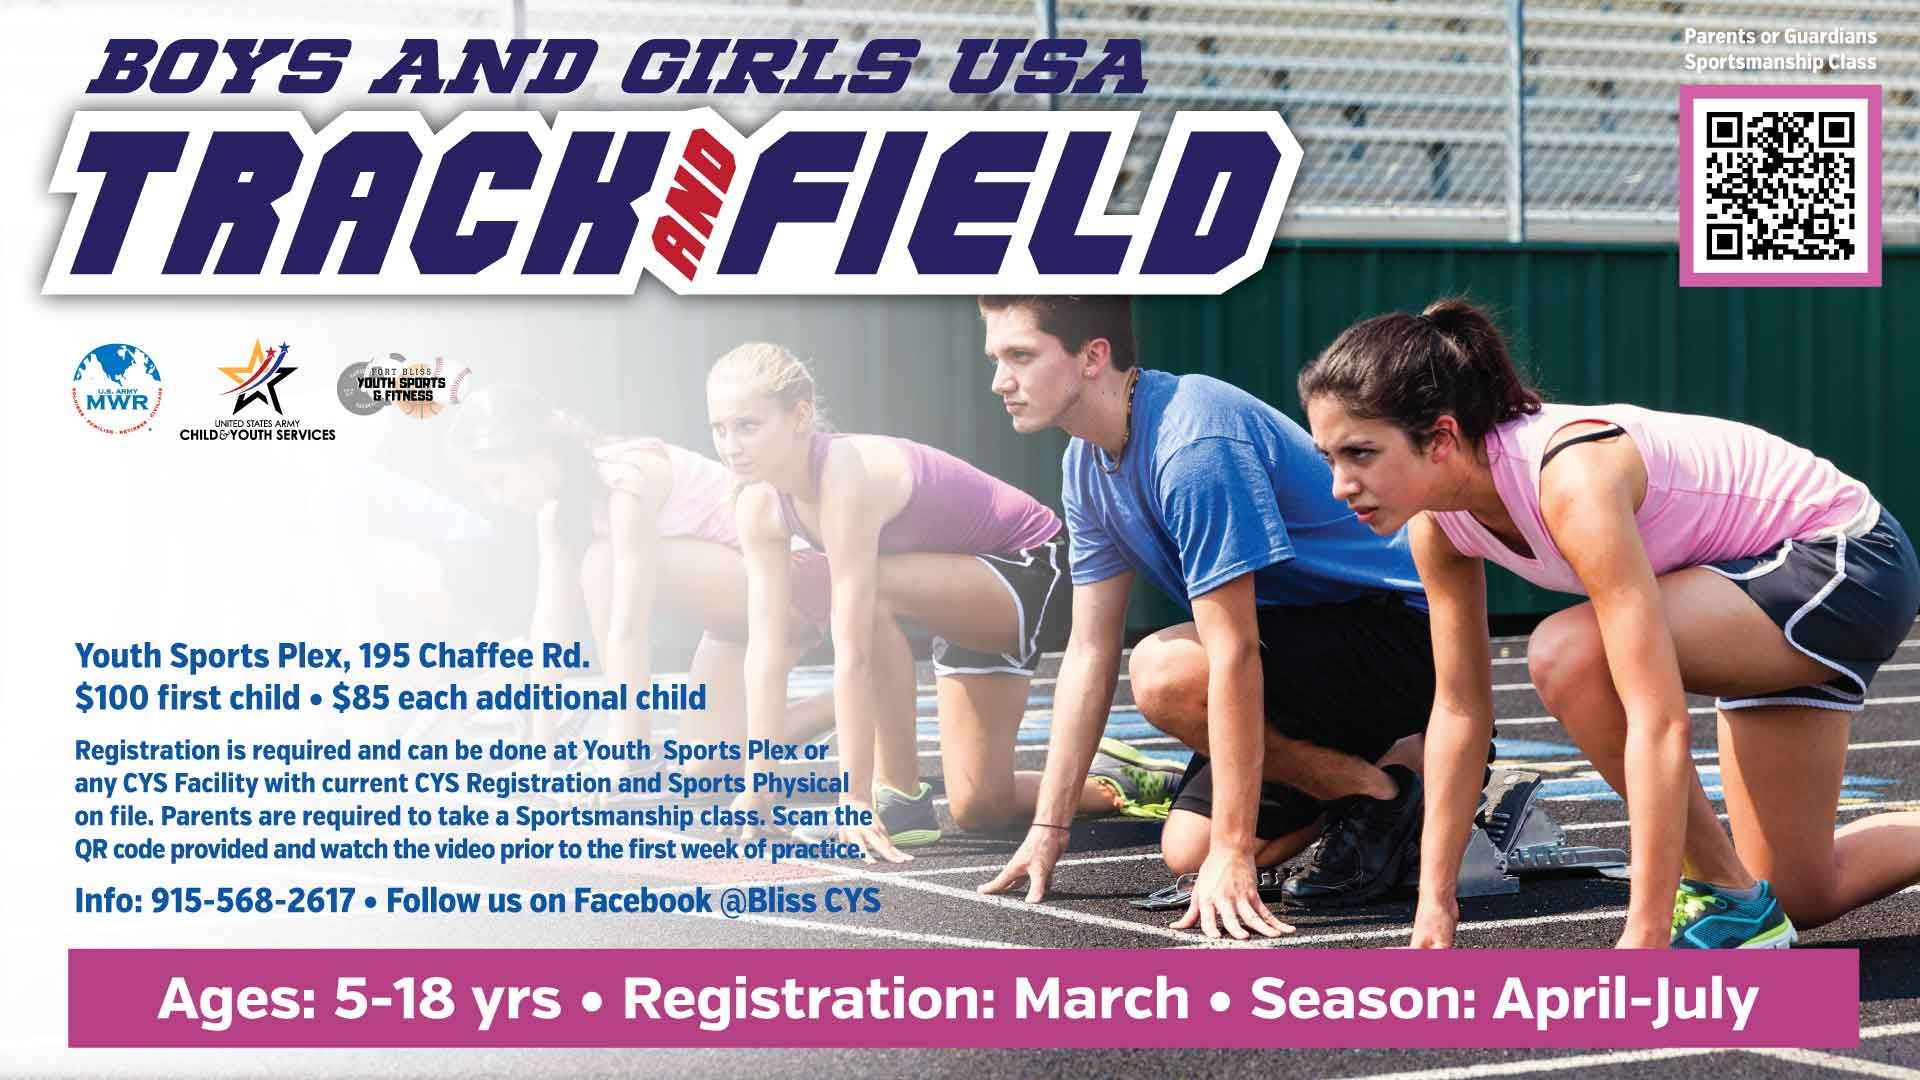 Boys and Girls USA Track & Field